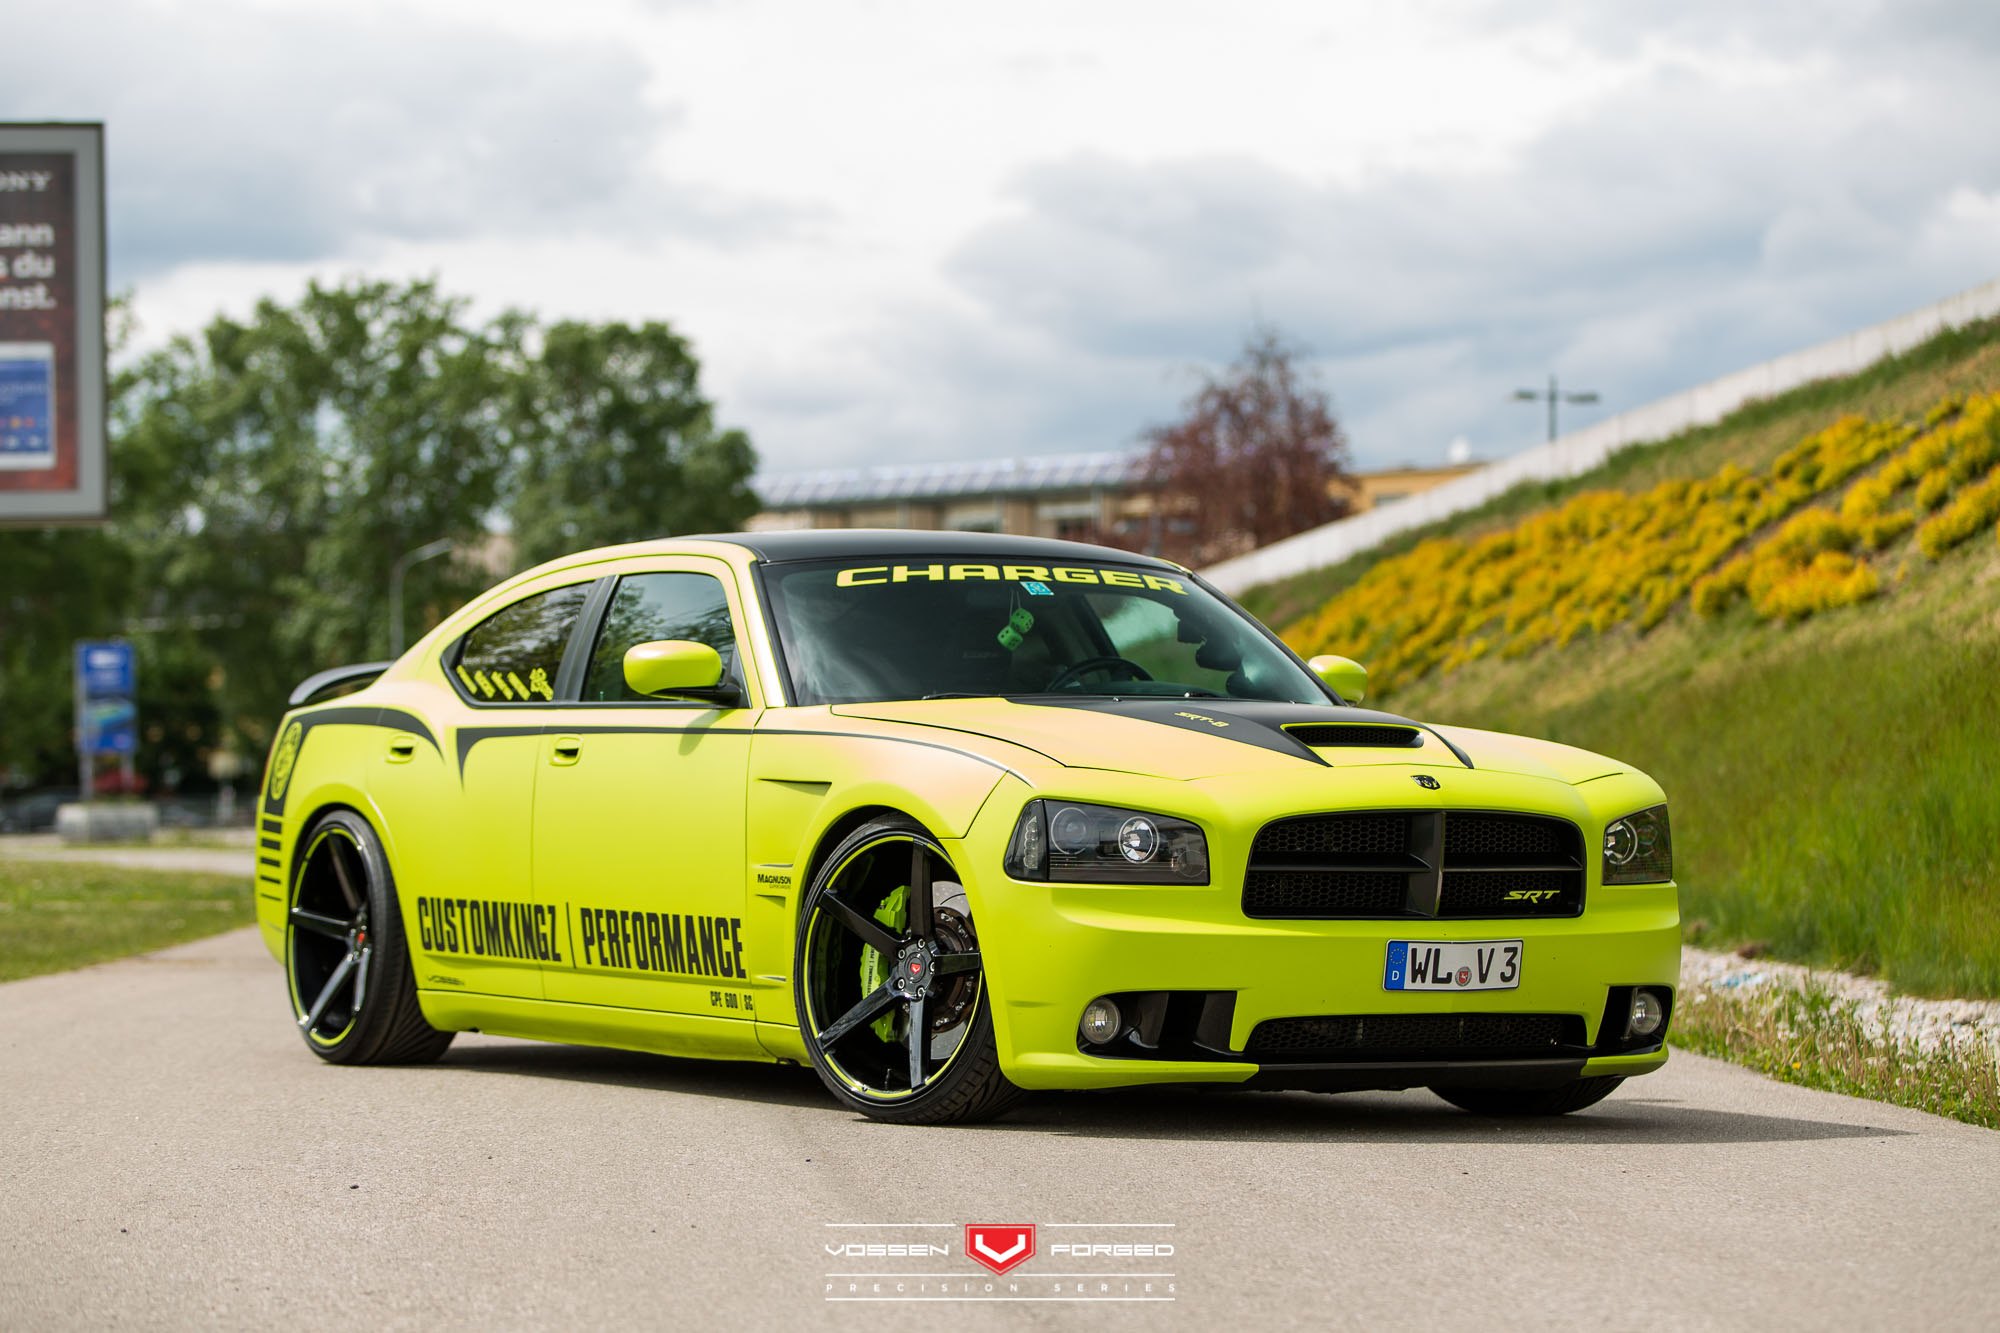 Custom Lime Yellow Dodge Charger SRT - Photo by Vossen